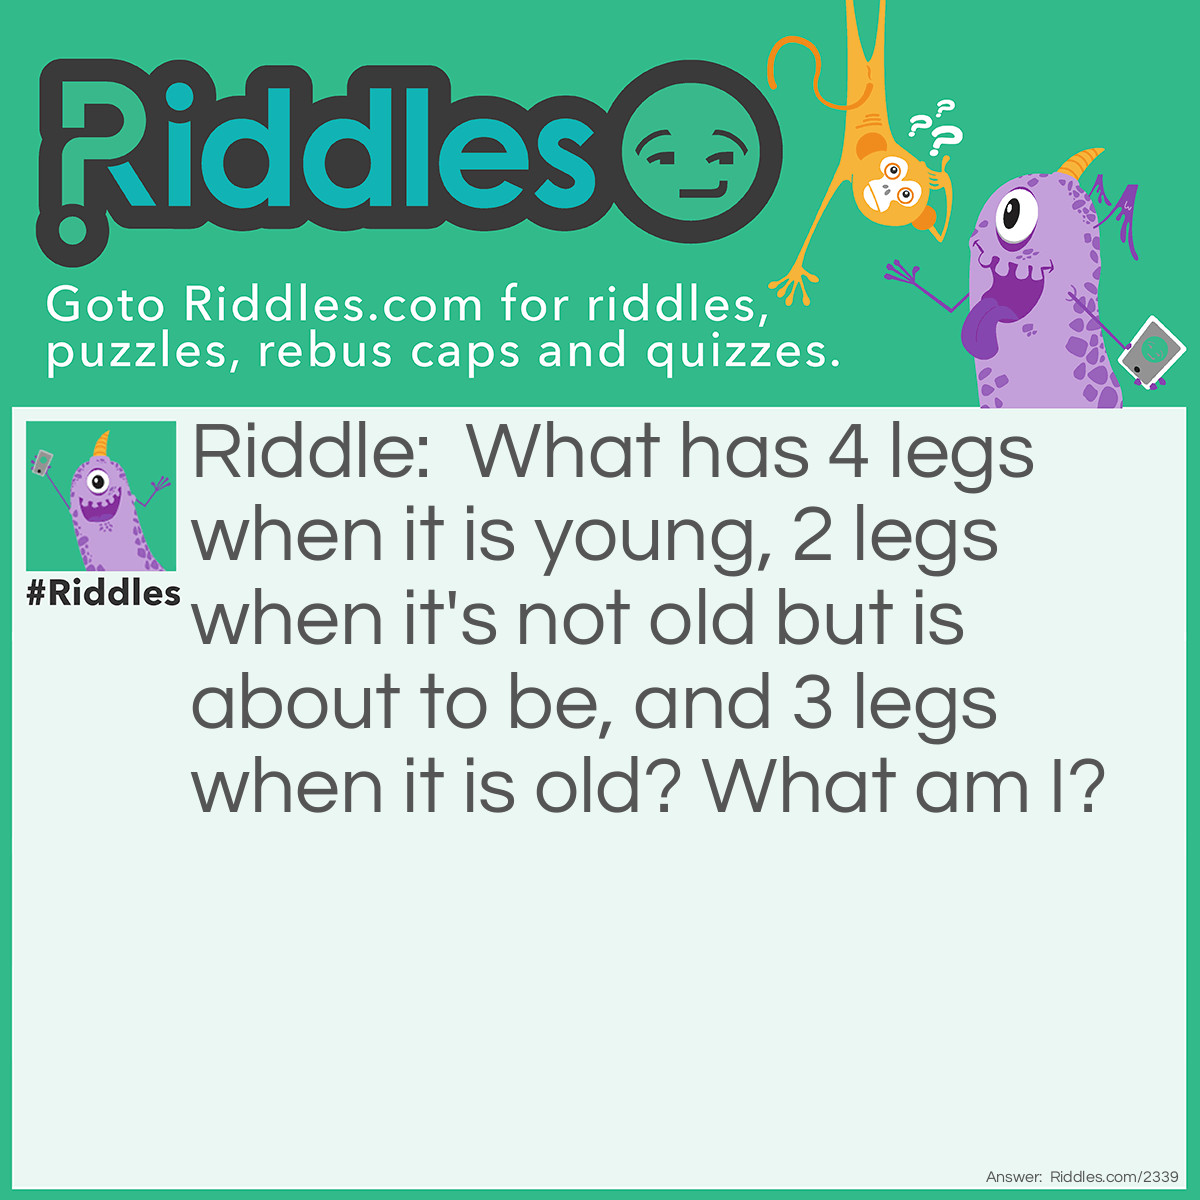 Riddle: What has 4 legs when it is young, 2 legs when its not old but is about to be, and has 3 legs when it is old. What am I? Answer: I am a human. I crawl on 4 legs when I am a baby I walk on 2 legs when I am an adult, and I have a cane while walking when I am old.